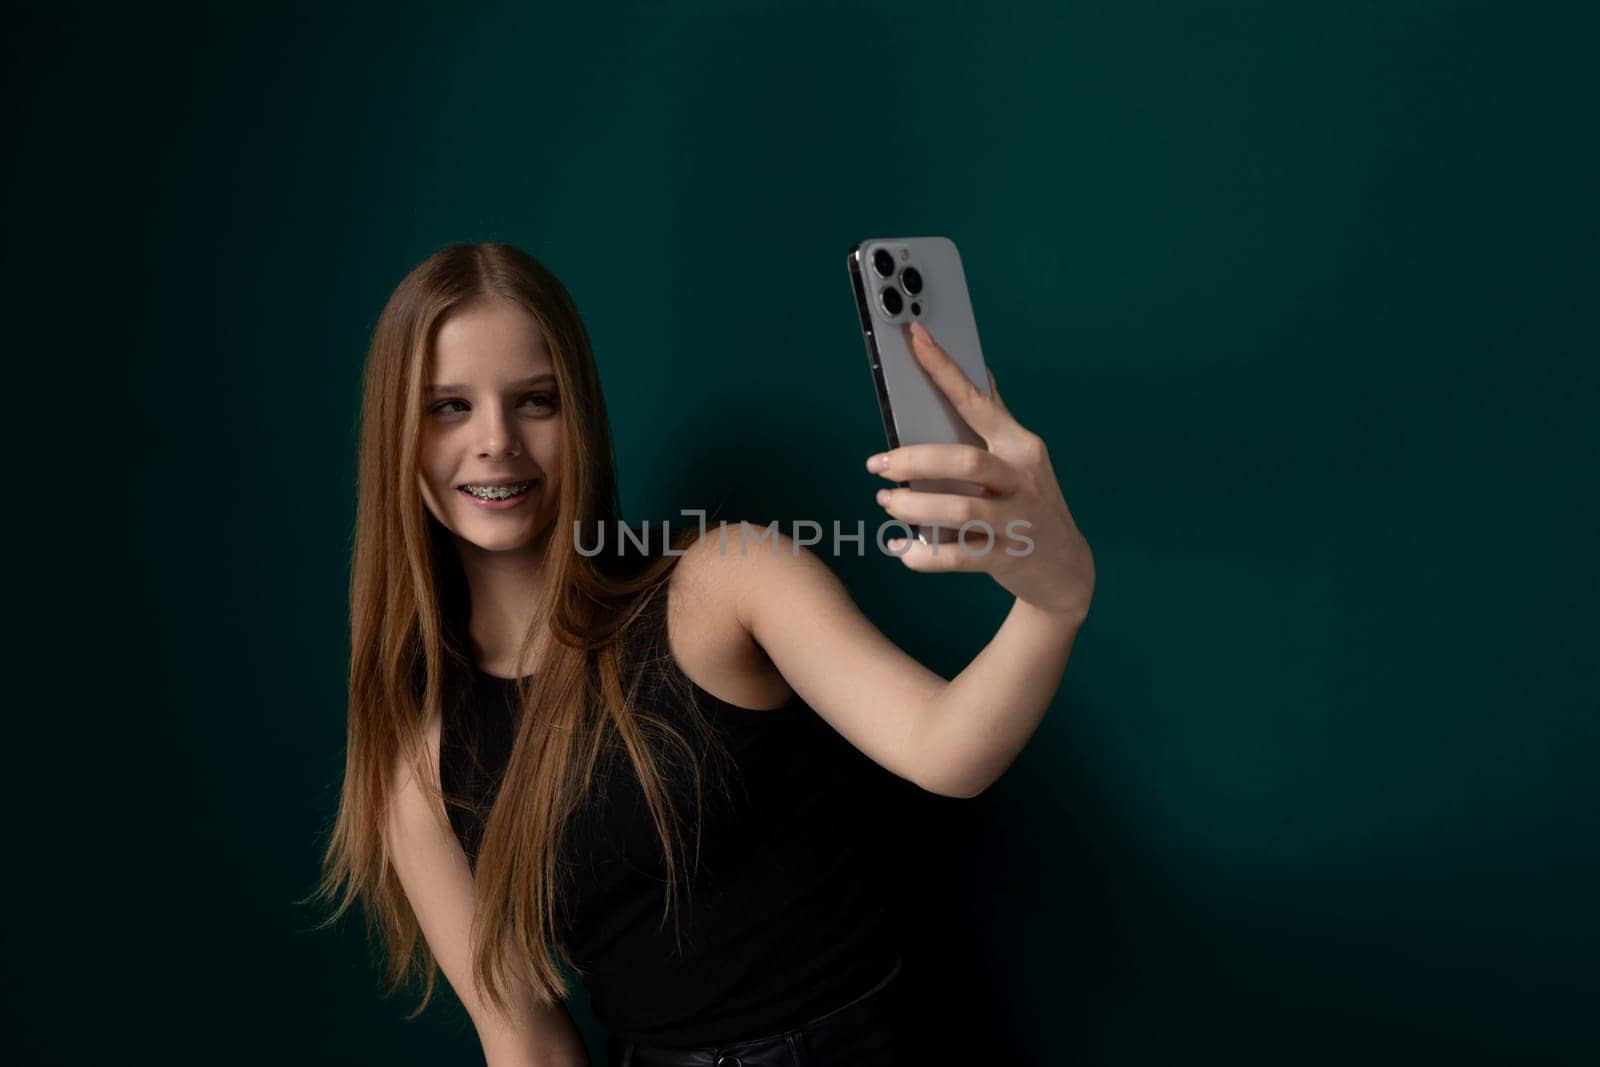 A woman is seen holding a cell phone at arms length, smiling and posing for a selfie. She is capturing the moment on her device to share with others on social media.